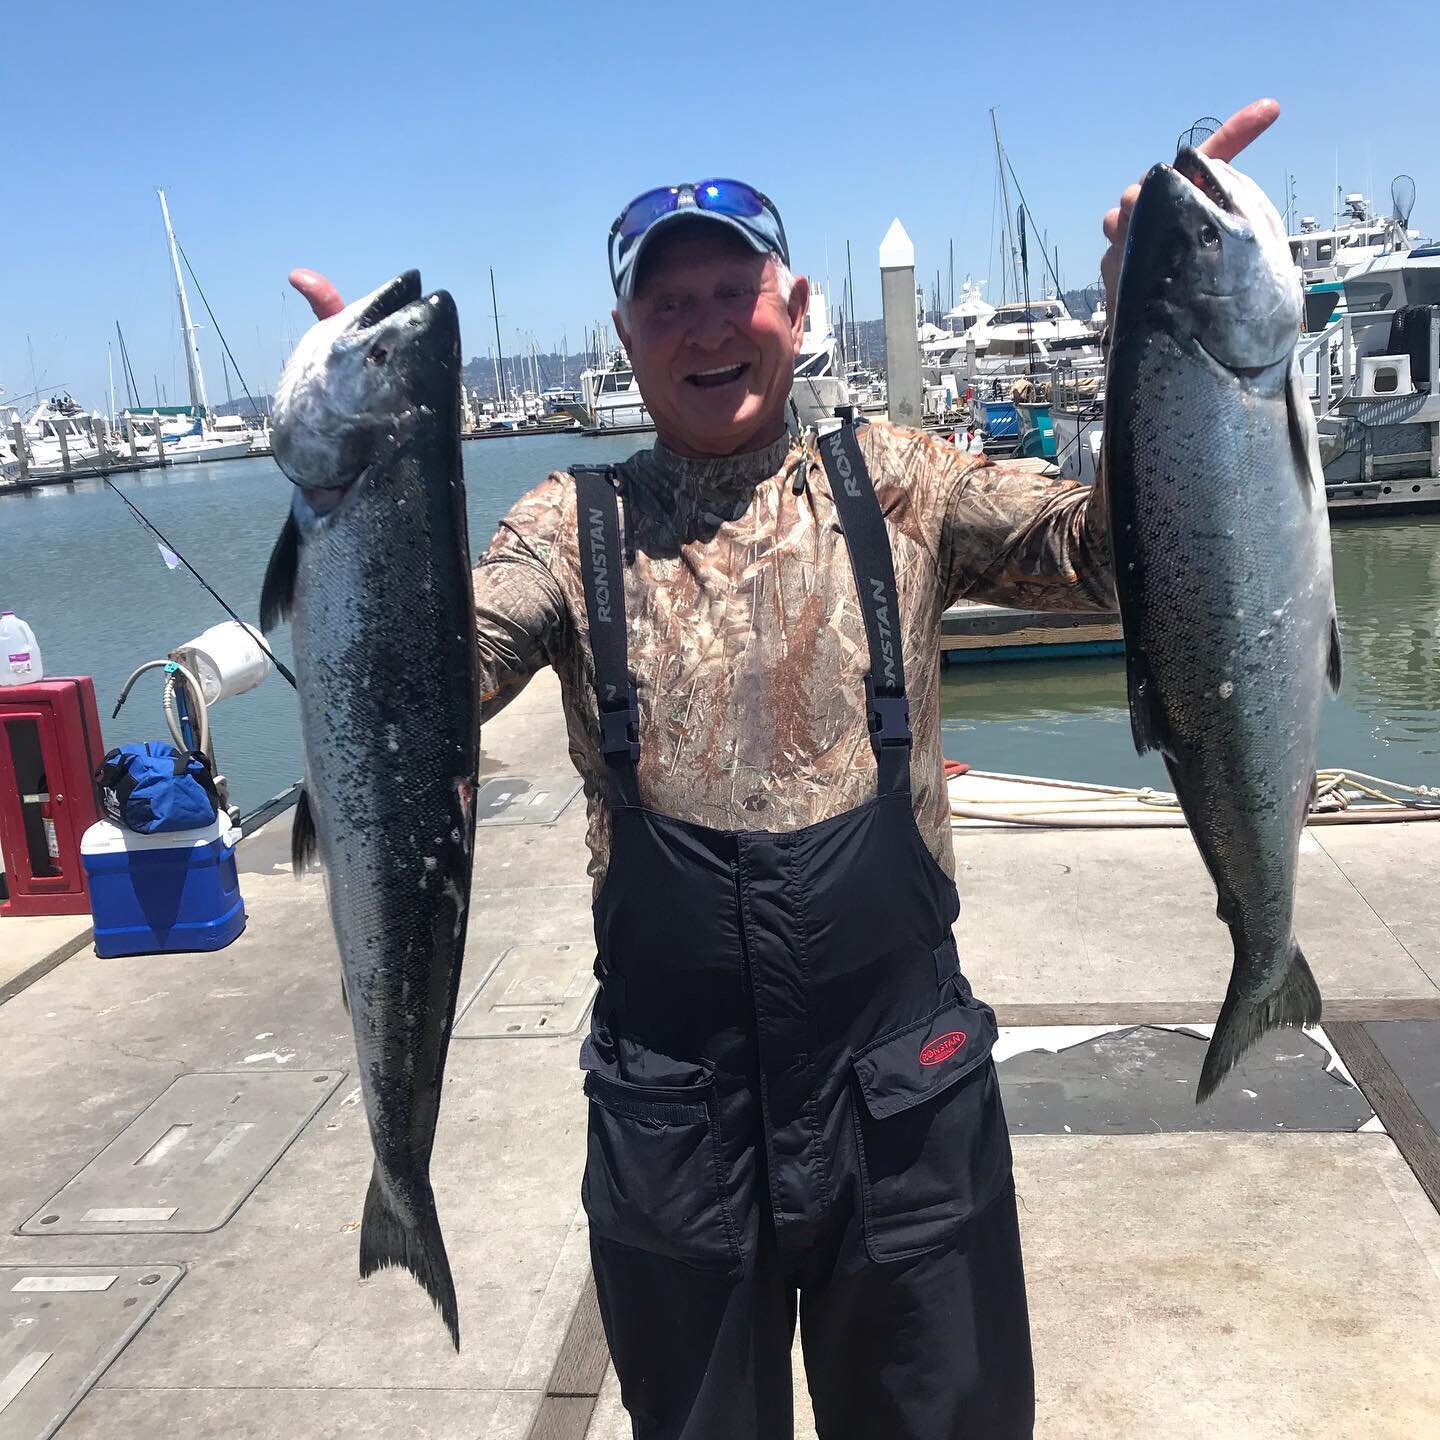 Limits before noon again!! Who knows how long this bite is going to last, so get out when you can !! Visit us online at fishemeryville.com or visit our website pacificpearlcharters.com #fishemeryville #pacificpearlcharters #salmon #sfbayareafishing #